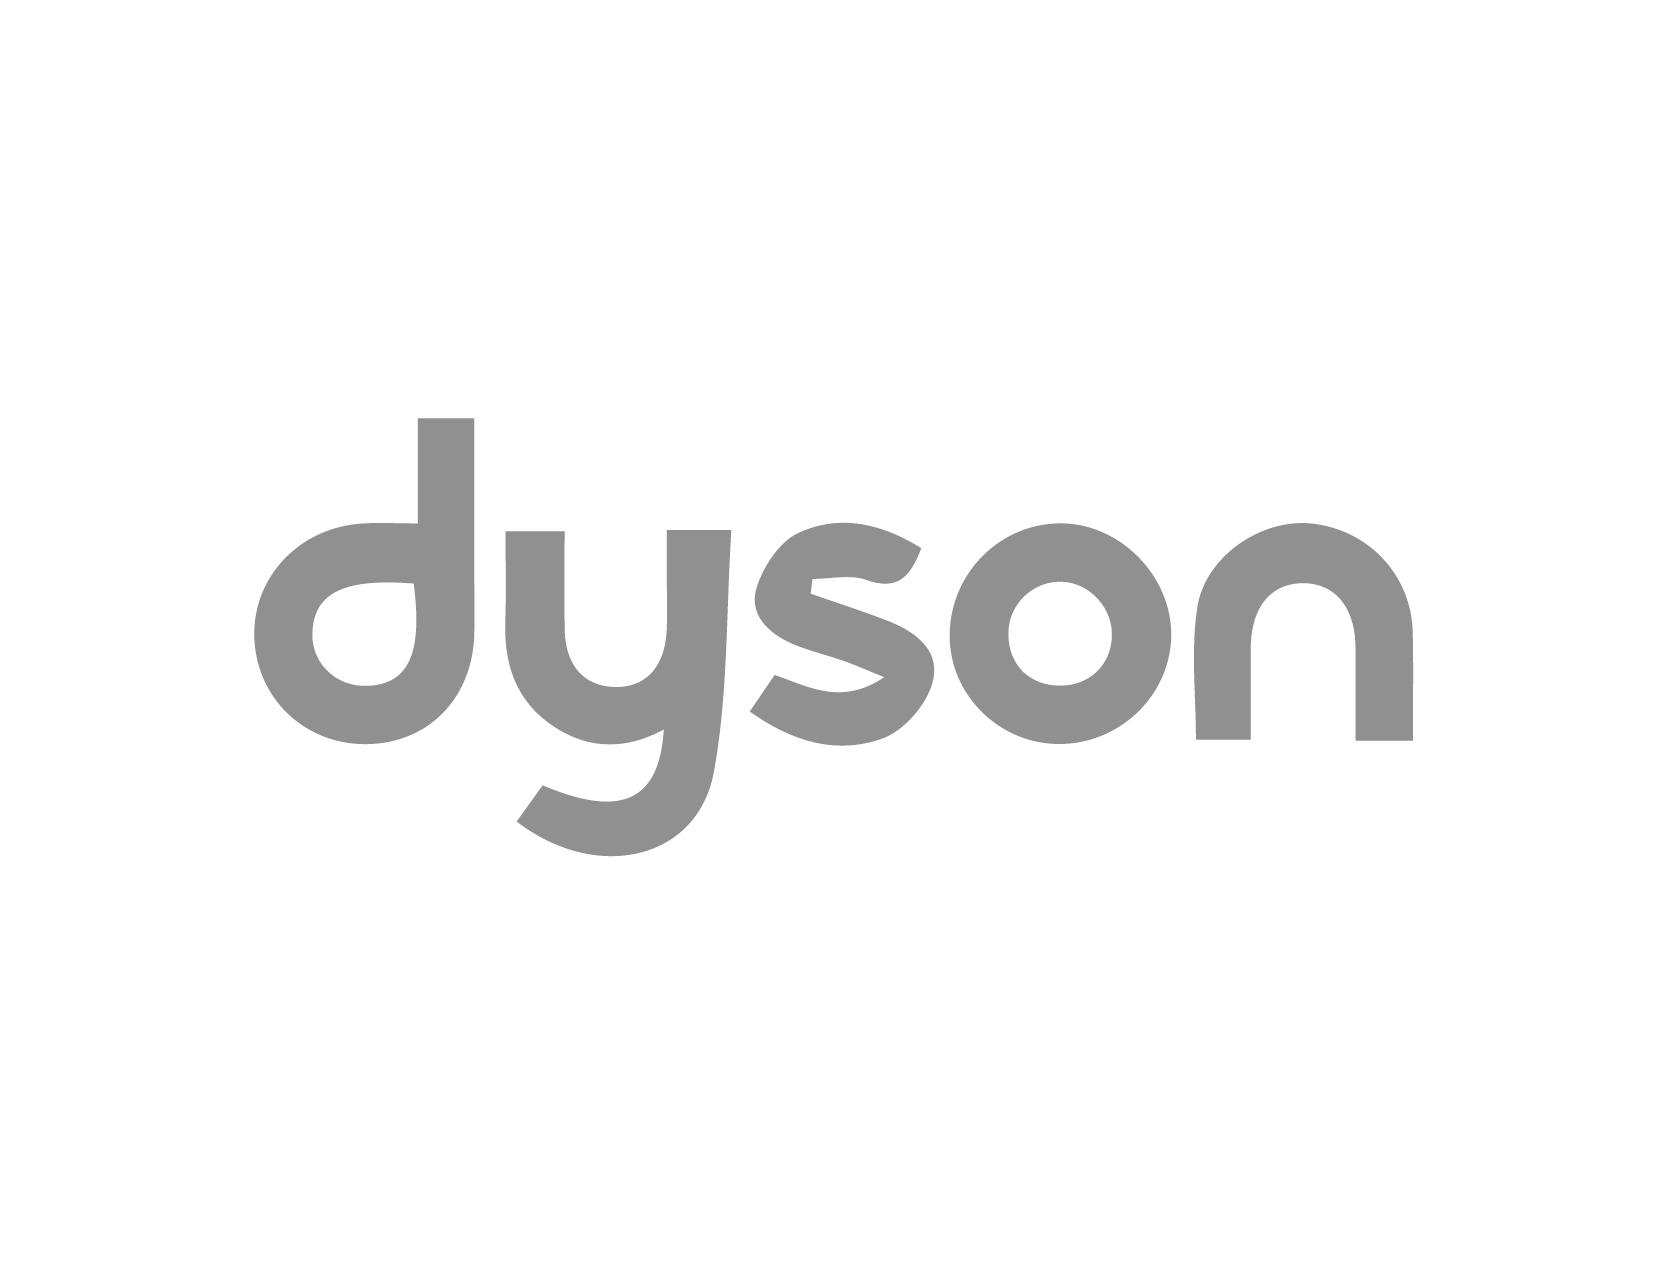 Elevate your style with Dyson's cutting-edge hair care